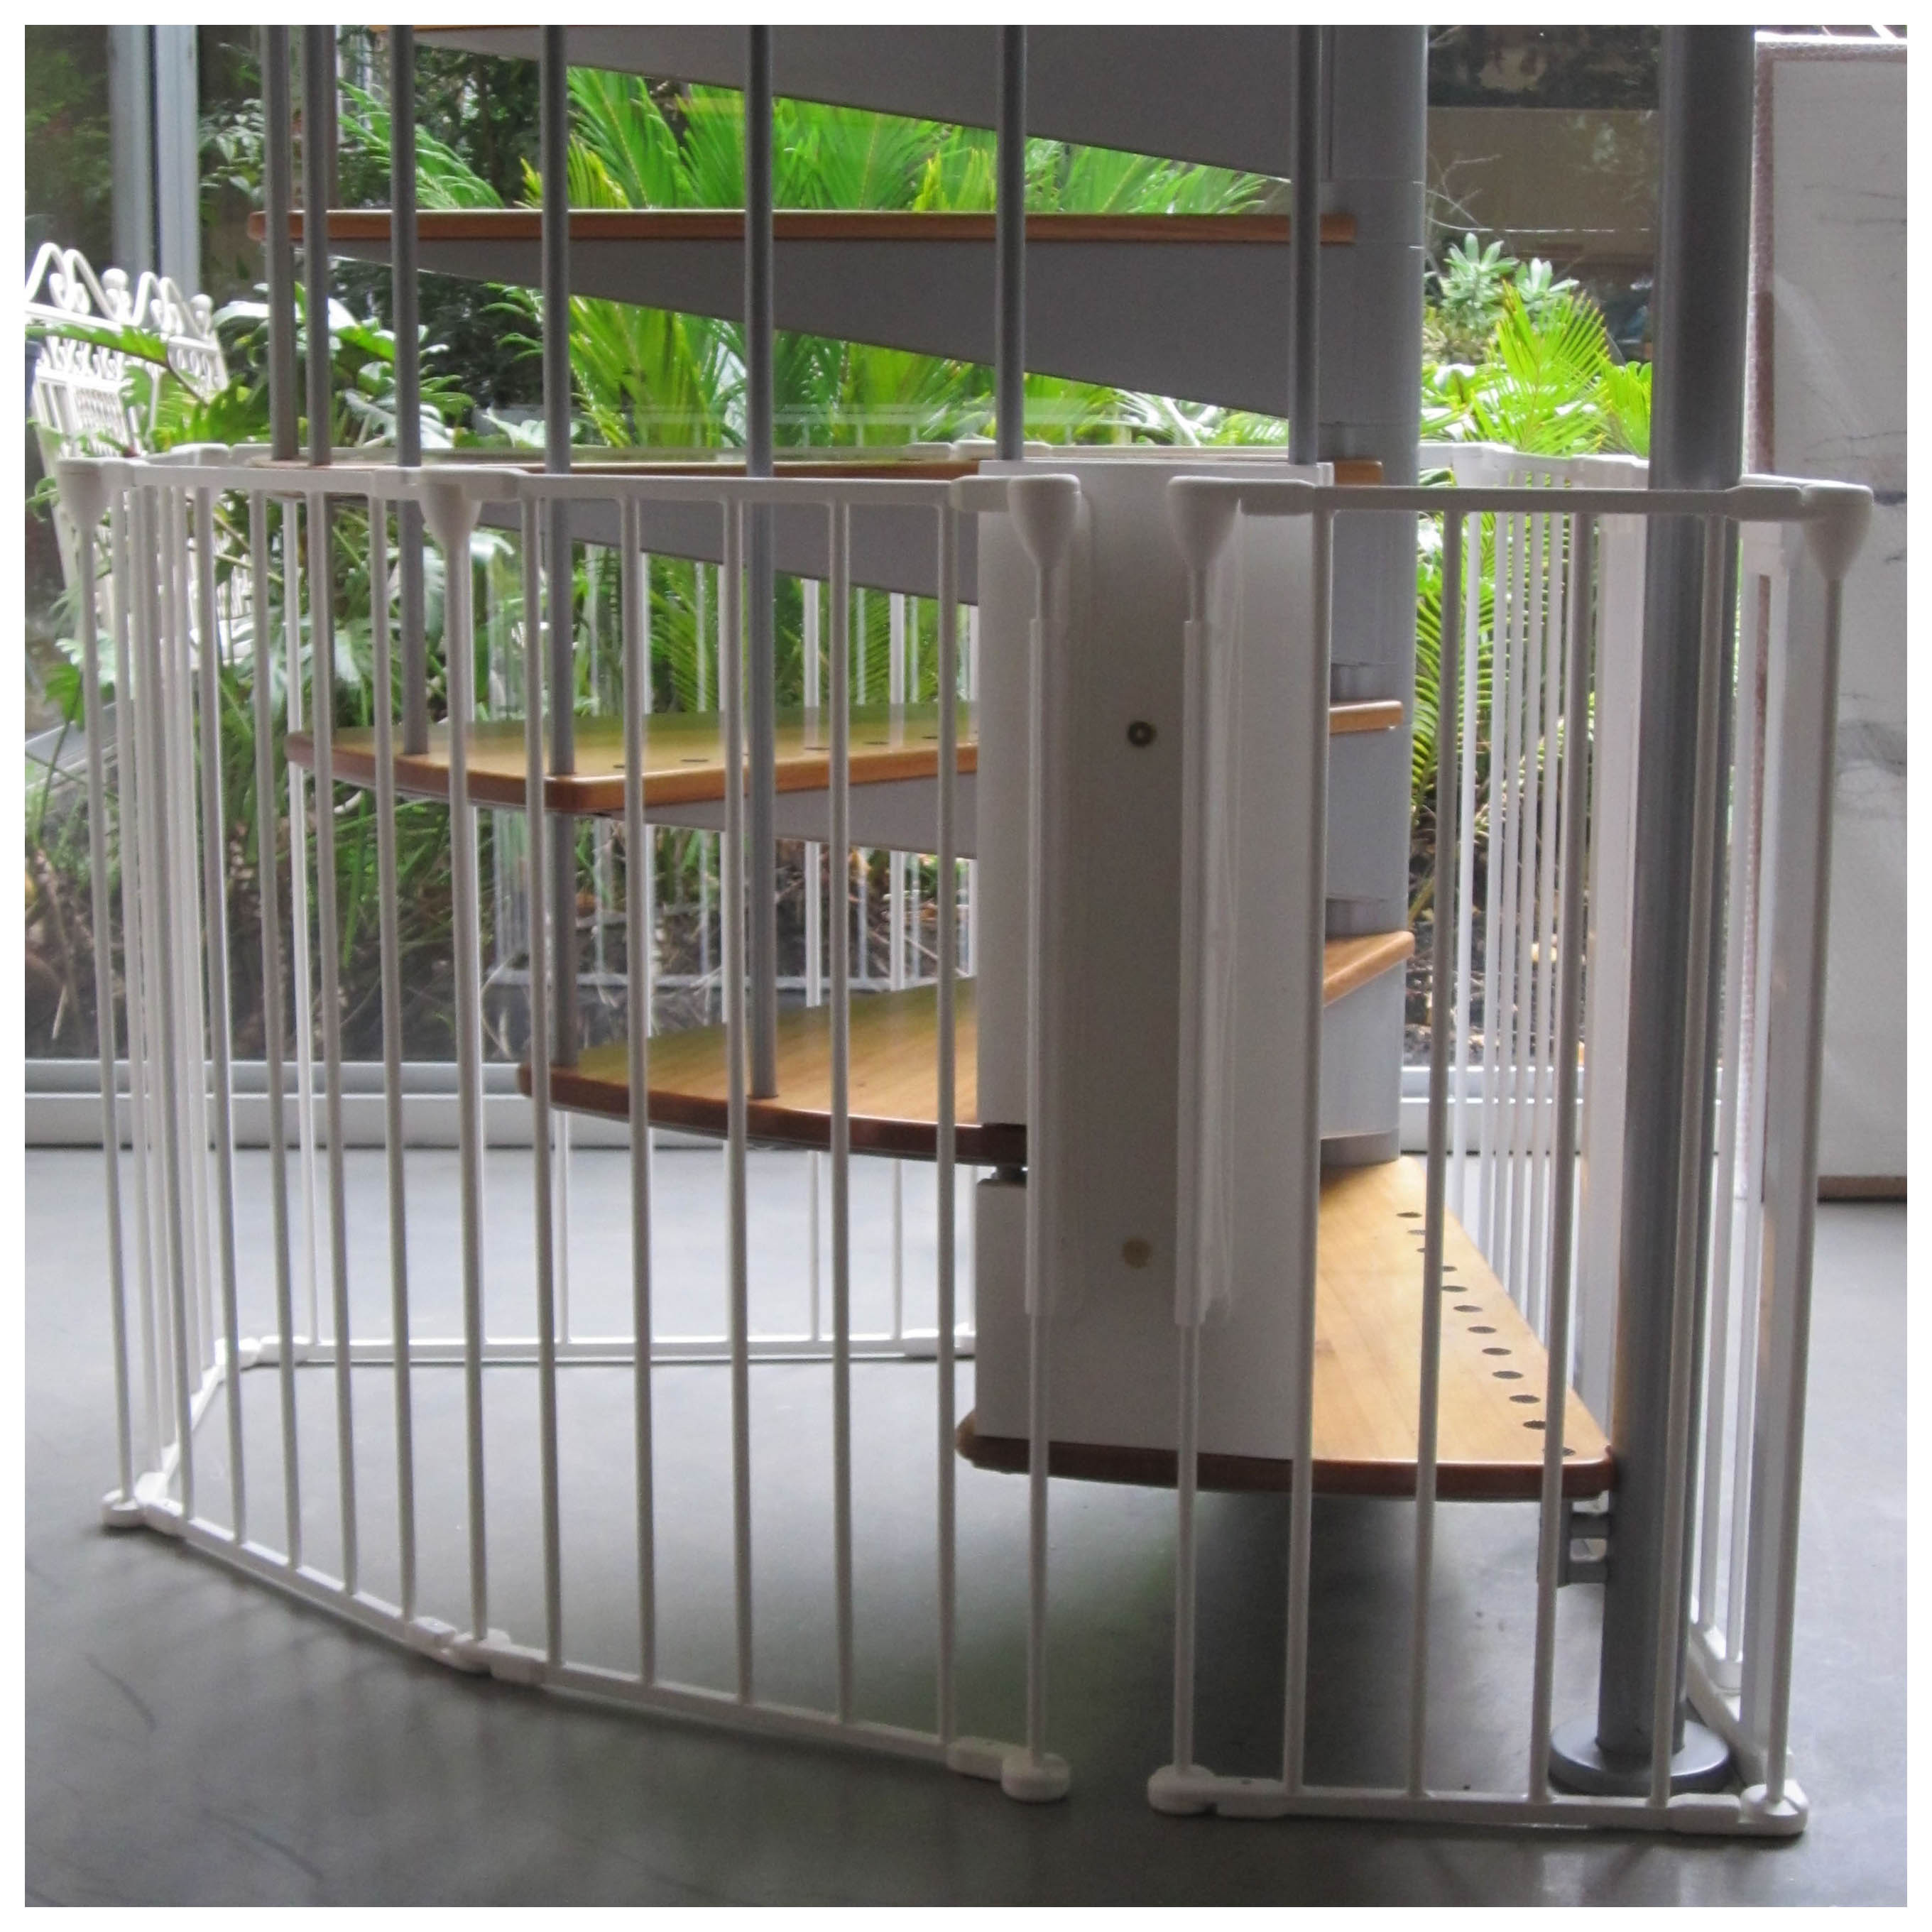 stair gate for spiral stairs